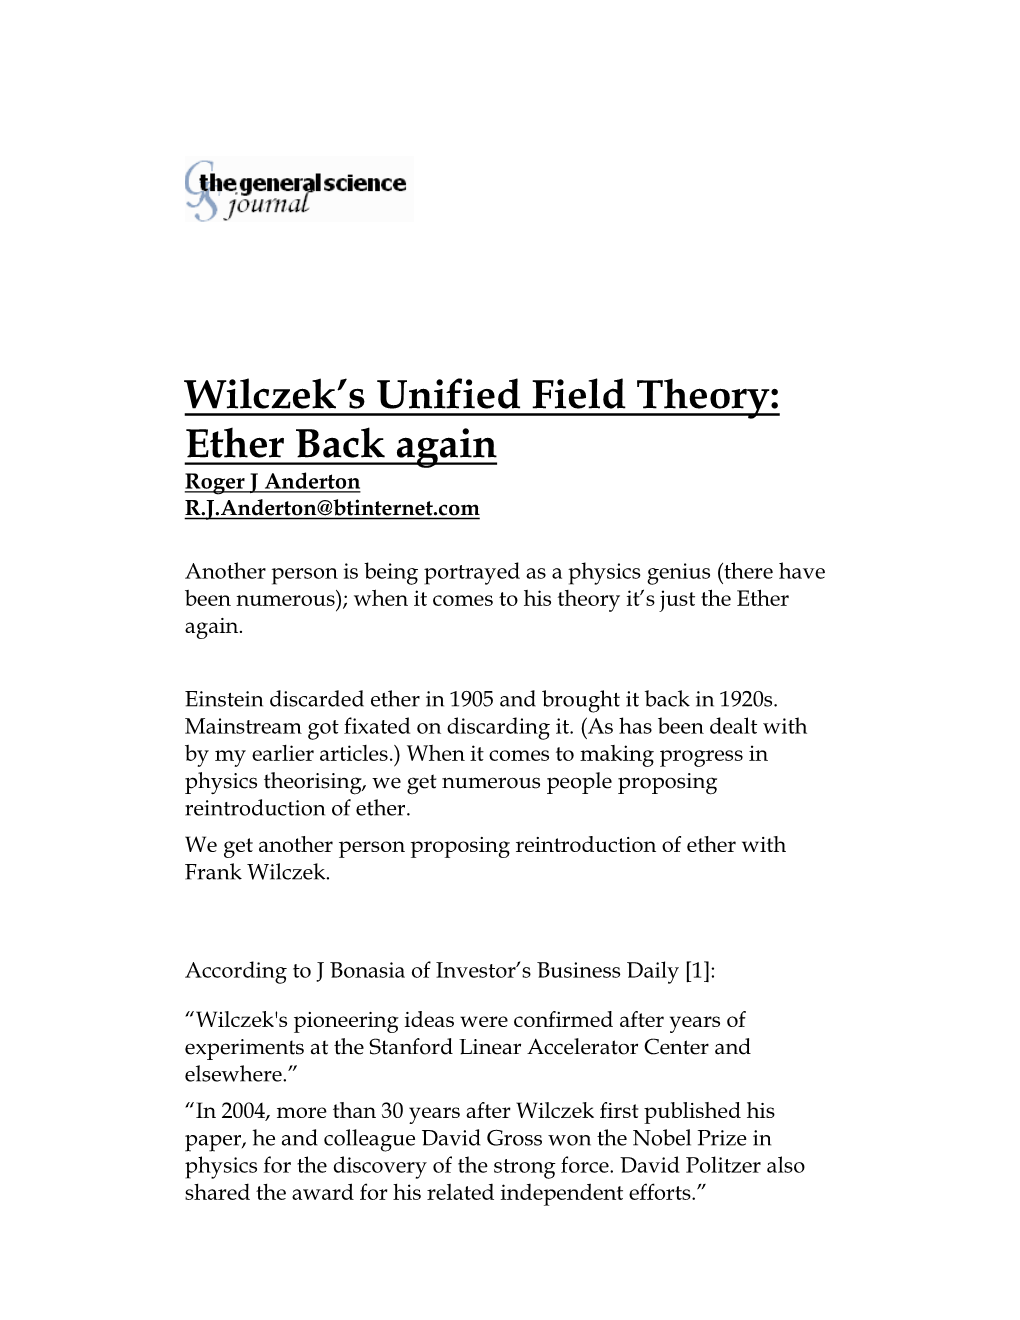 Wilczek's Unified Field Theory: Ether Back Again